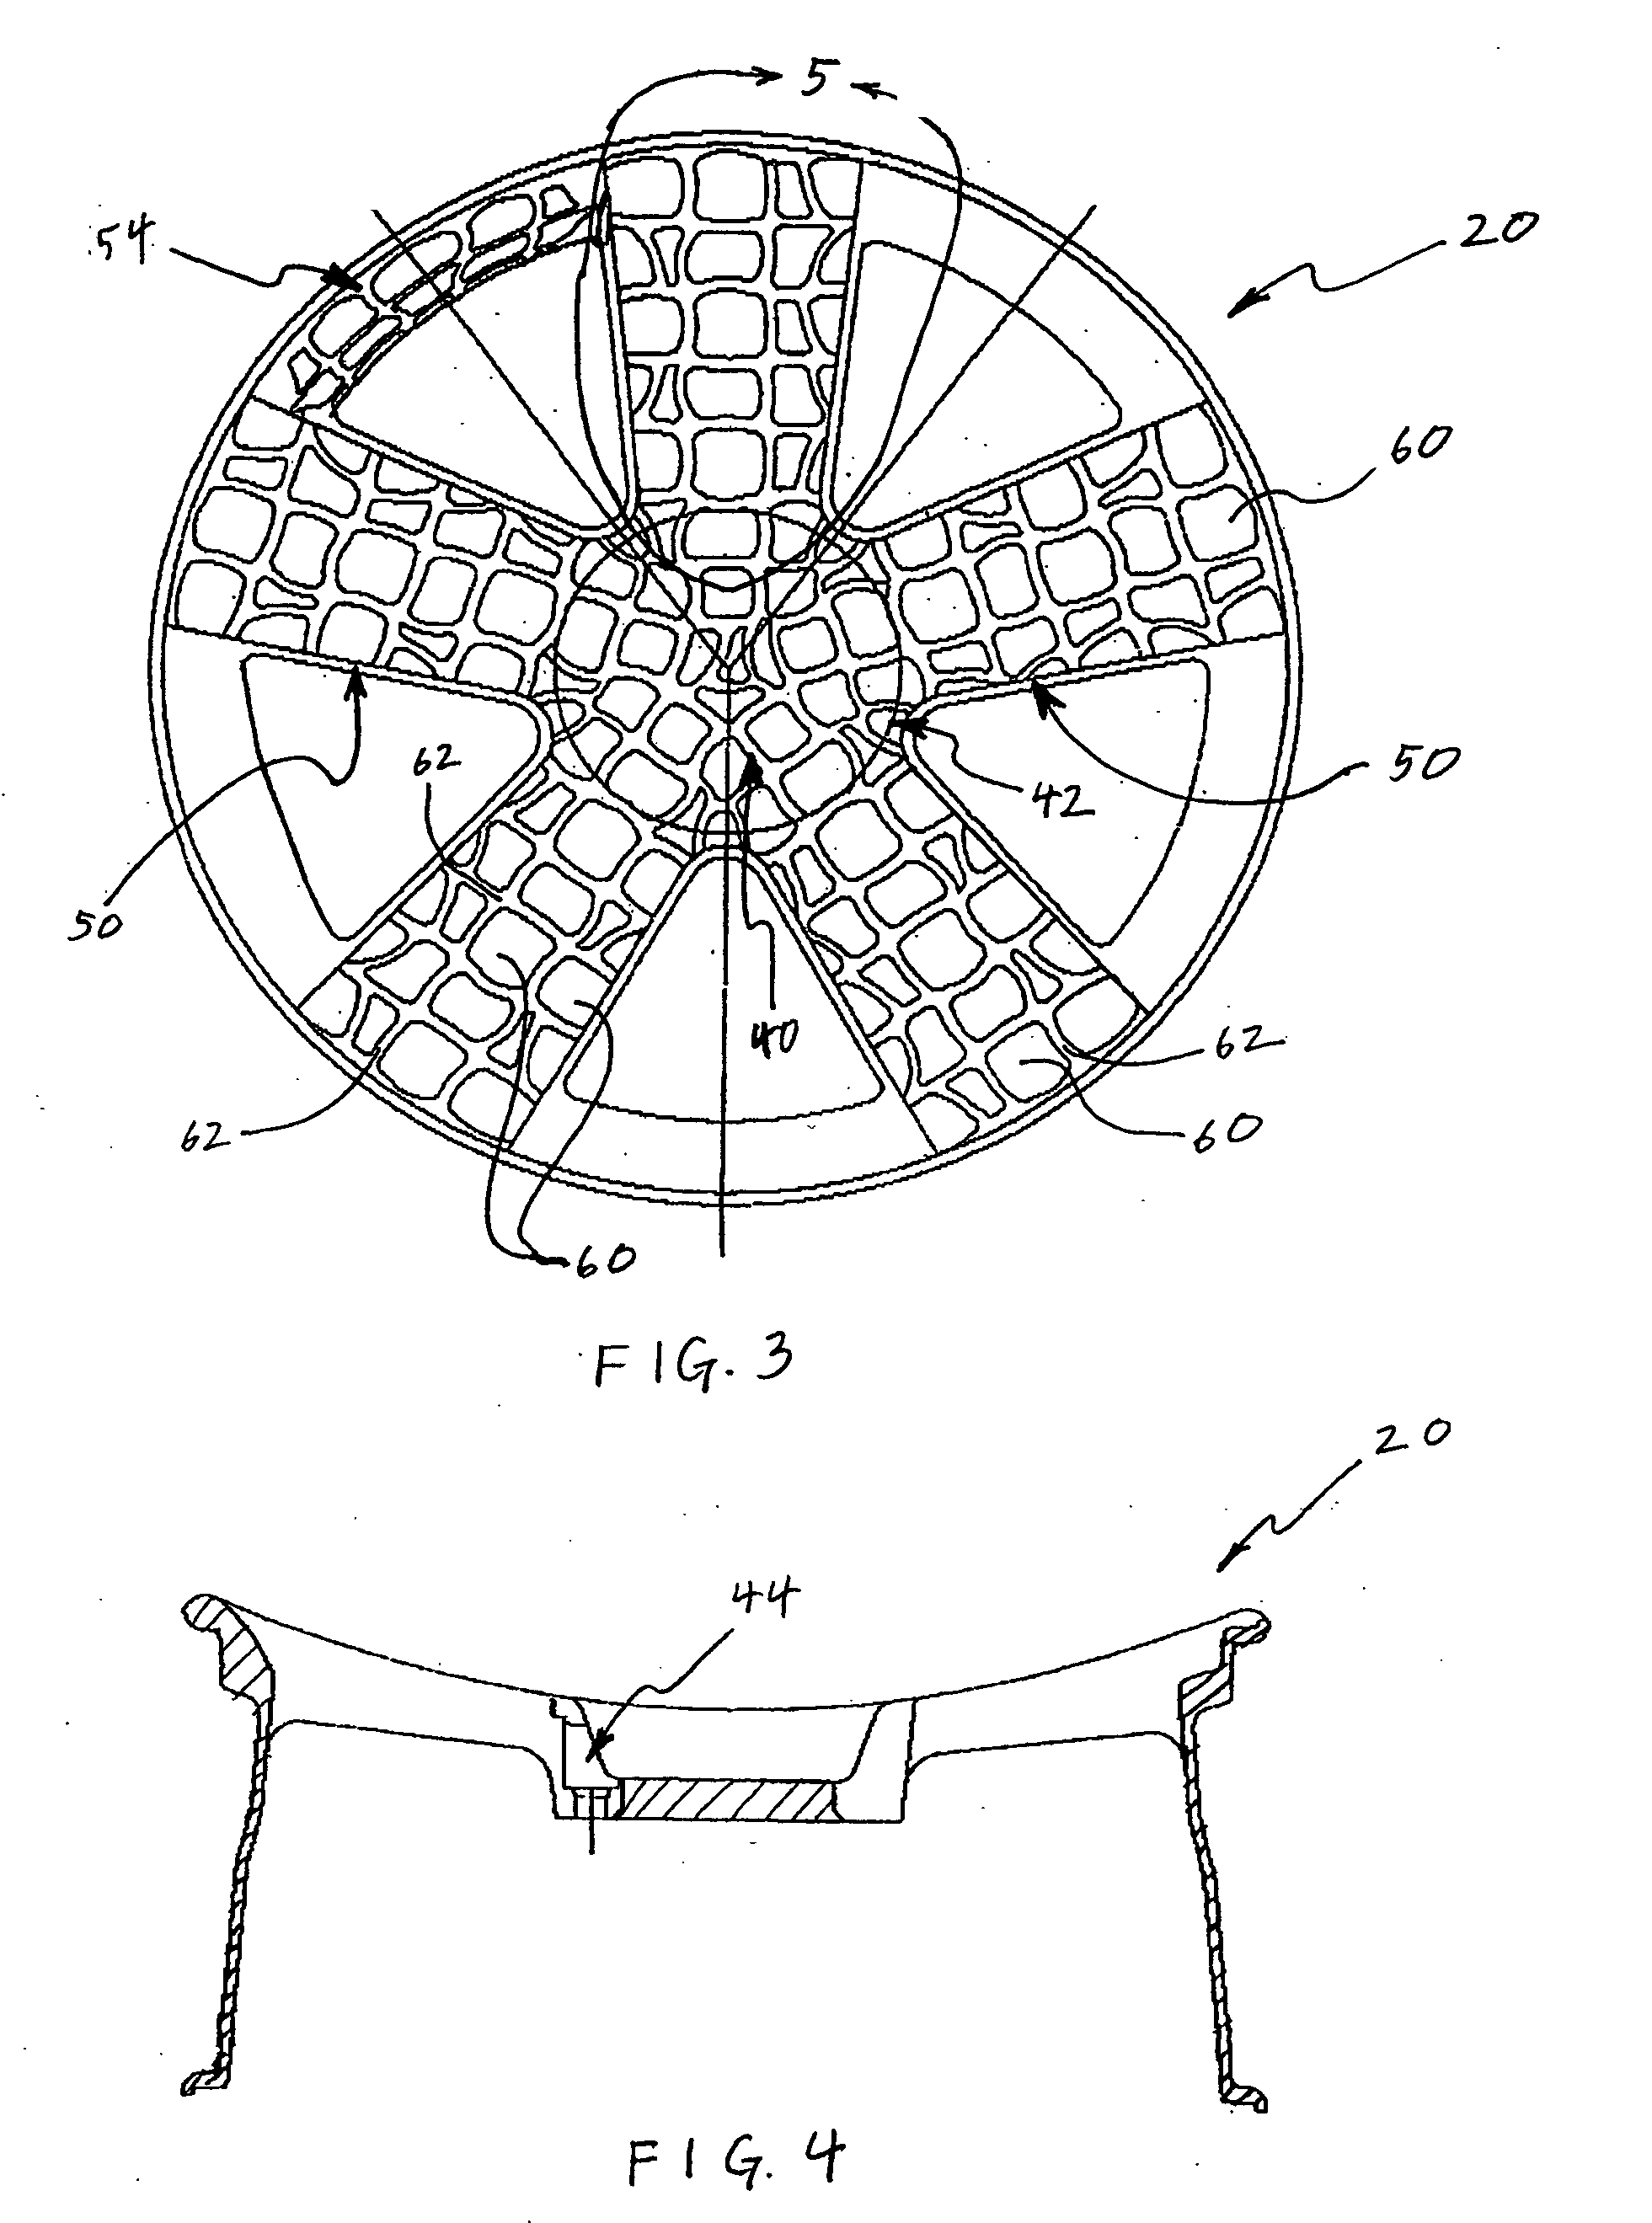 Vehicle wheel with an outer surface configured to simulate animal coverings